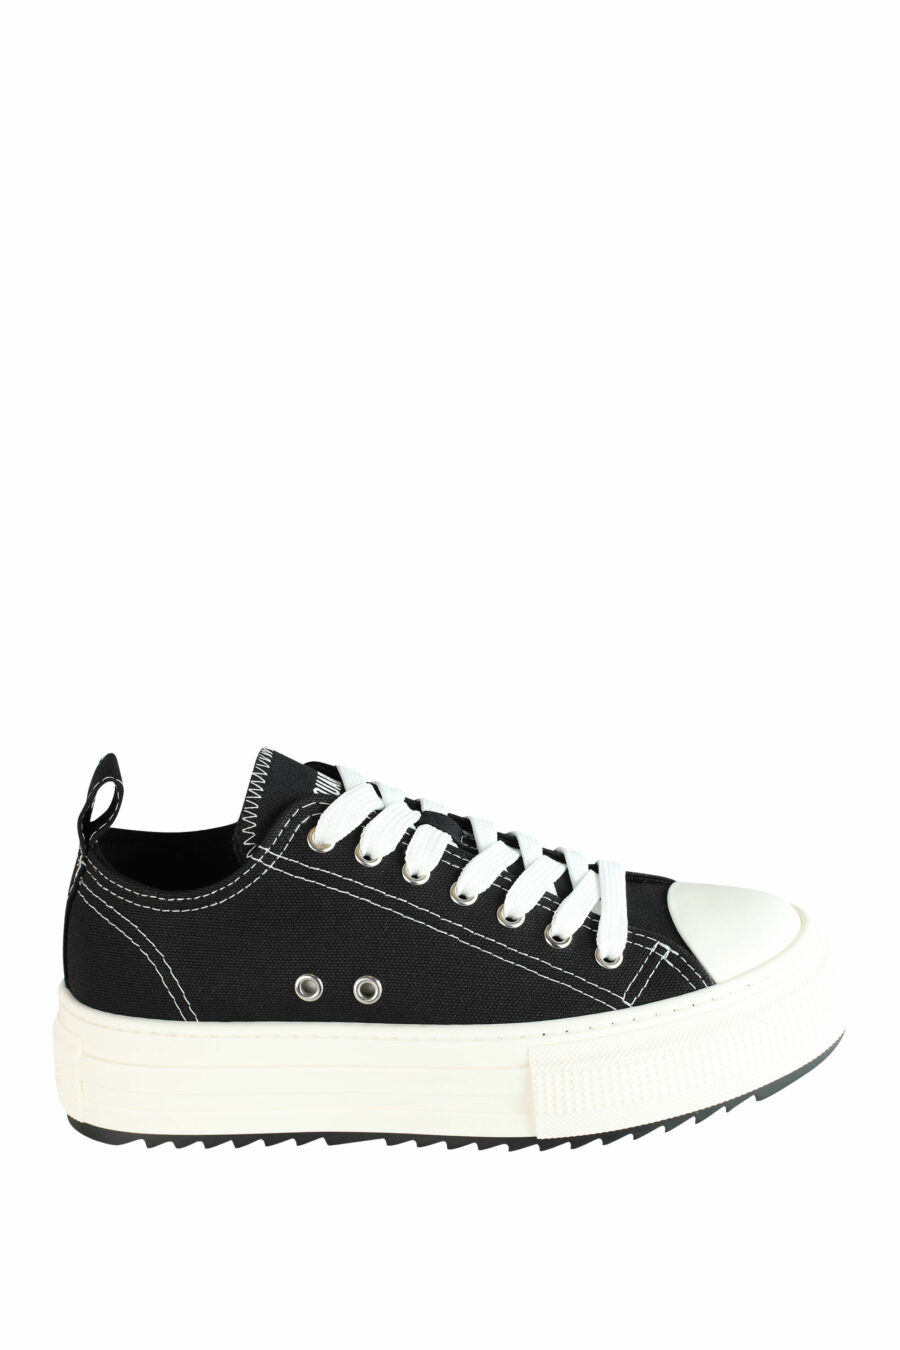 Black "berlin" trainers with platform and white mini-logo - IMG 1383